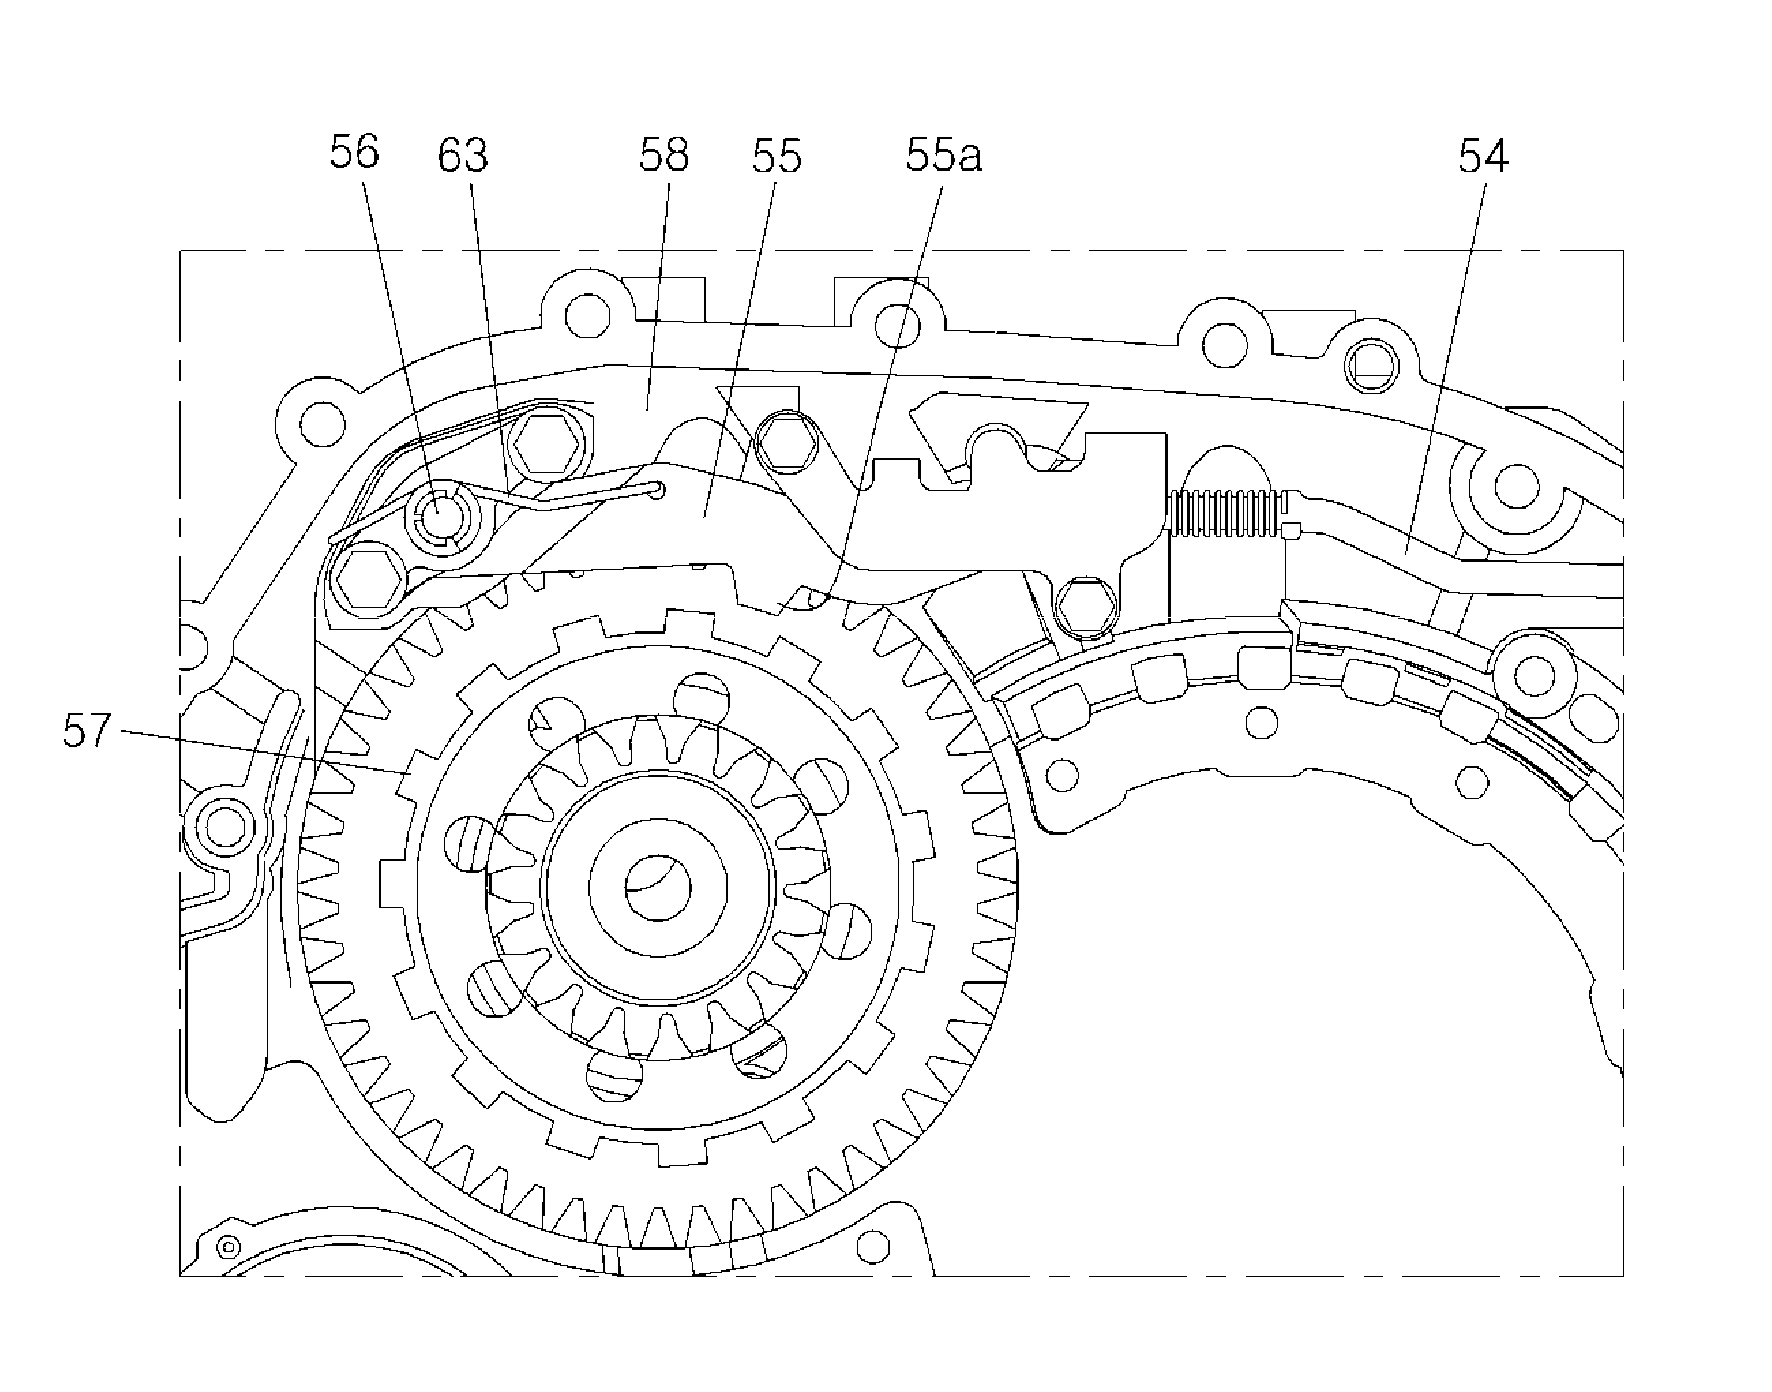 Parking apparatus for automatic transmission